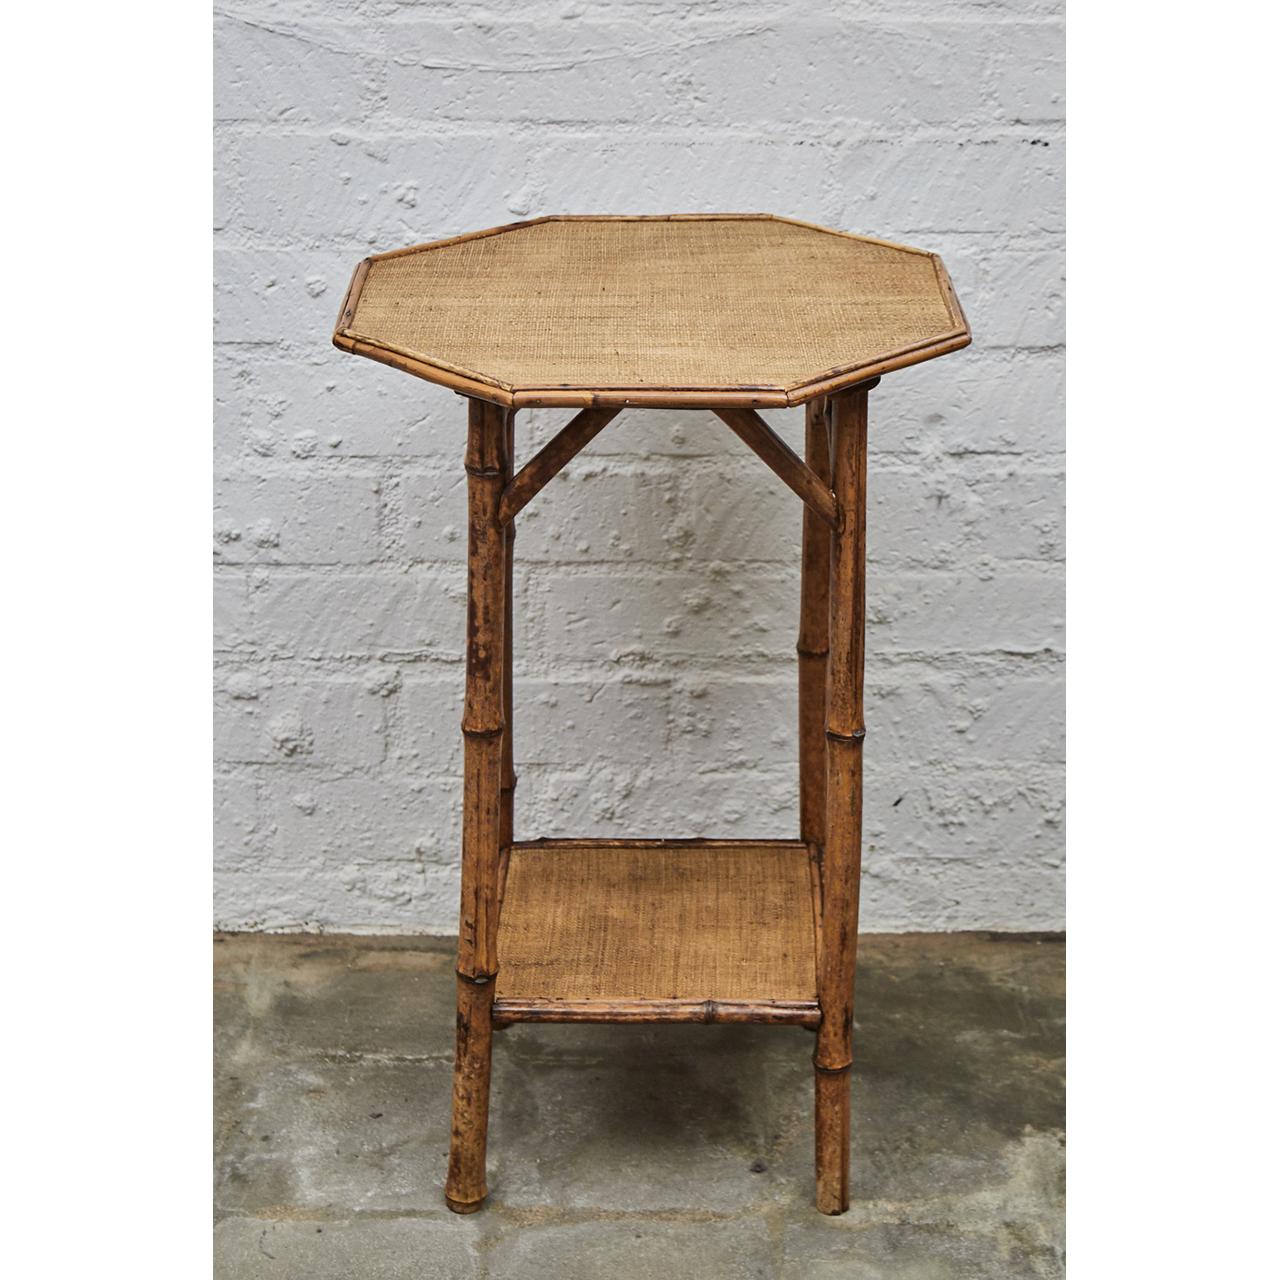 This Victorian side table is made of tiger bamboo with newly re-surfaced waxed raffia matting. The table has an octagonal top and square shelf. The straight legs have diagonal supports and have been reinforced with dowels for increased sturdiness.
 